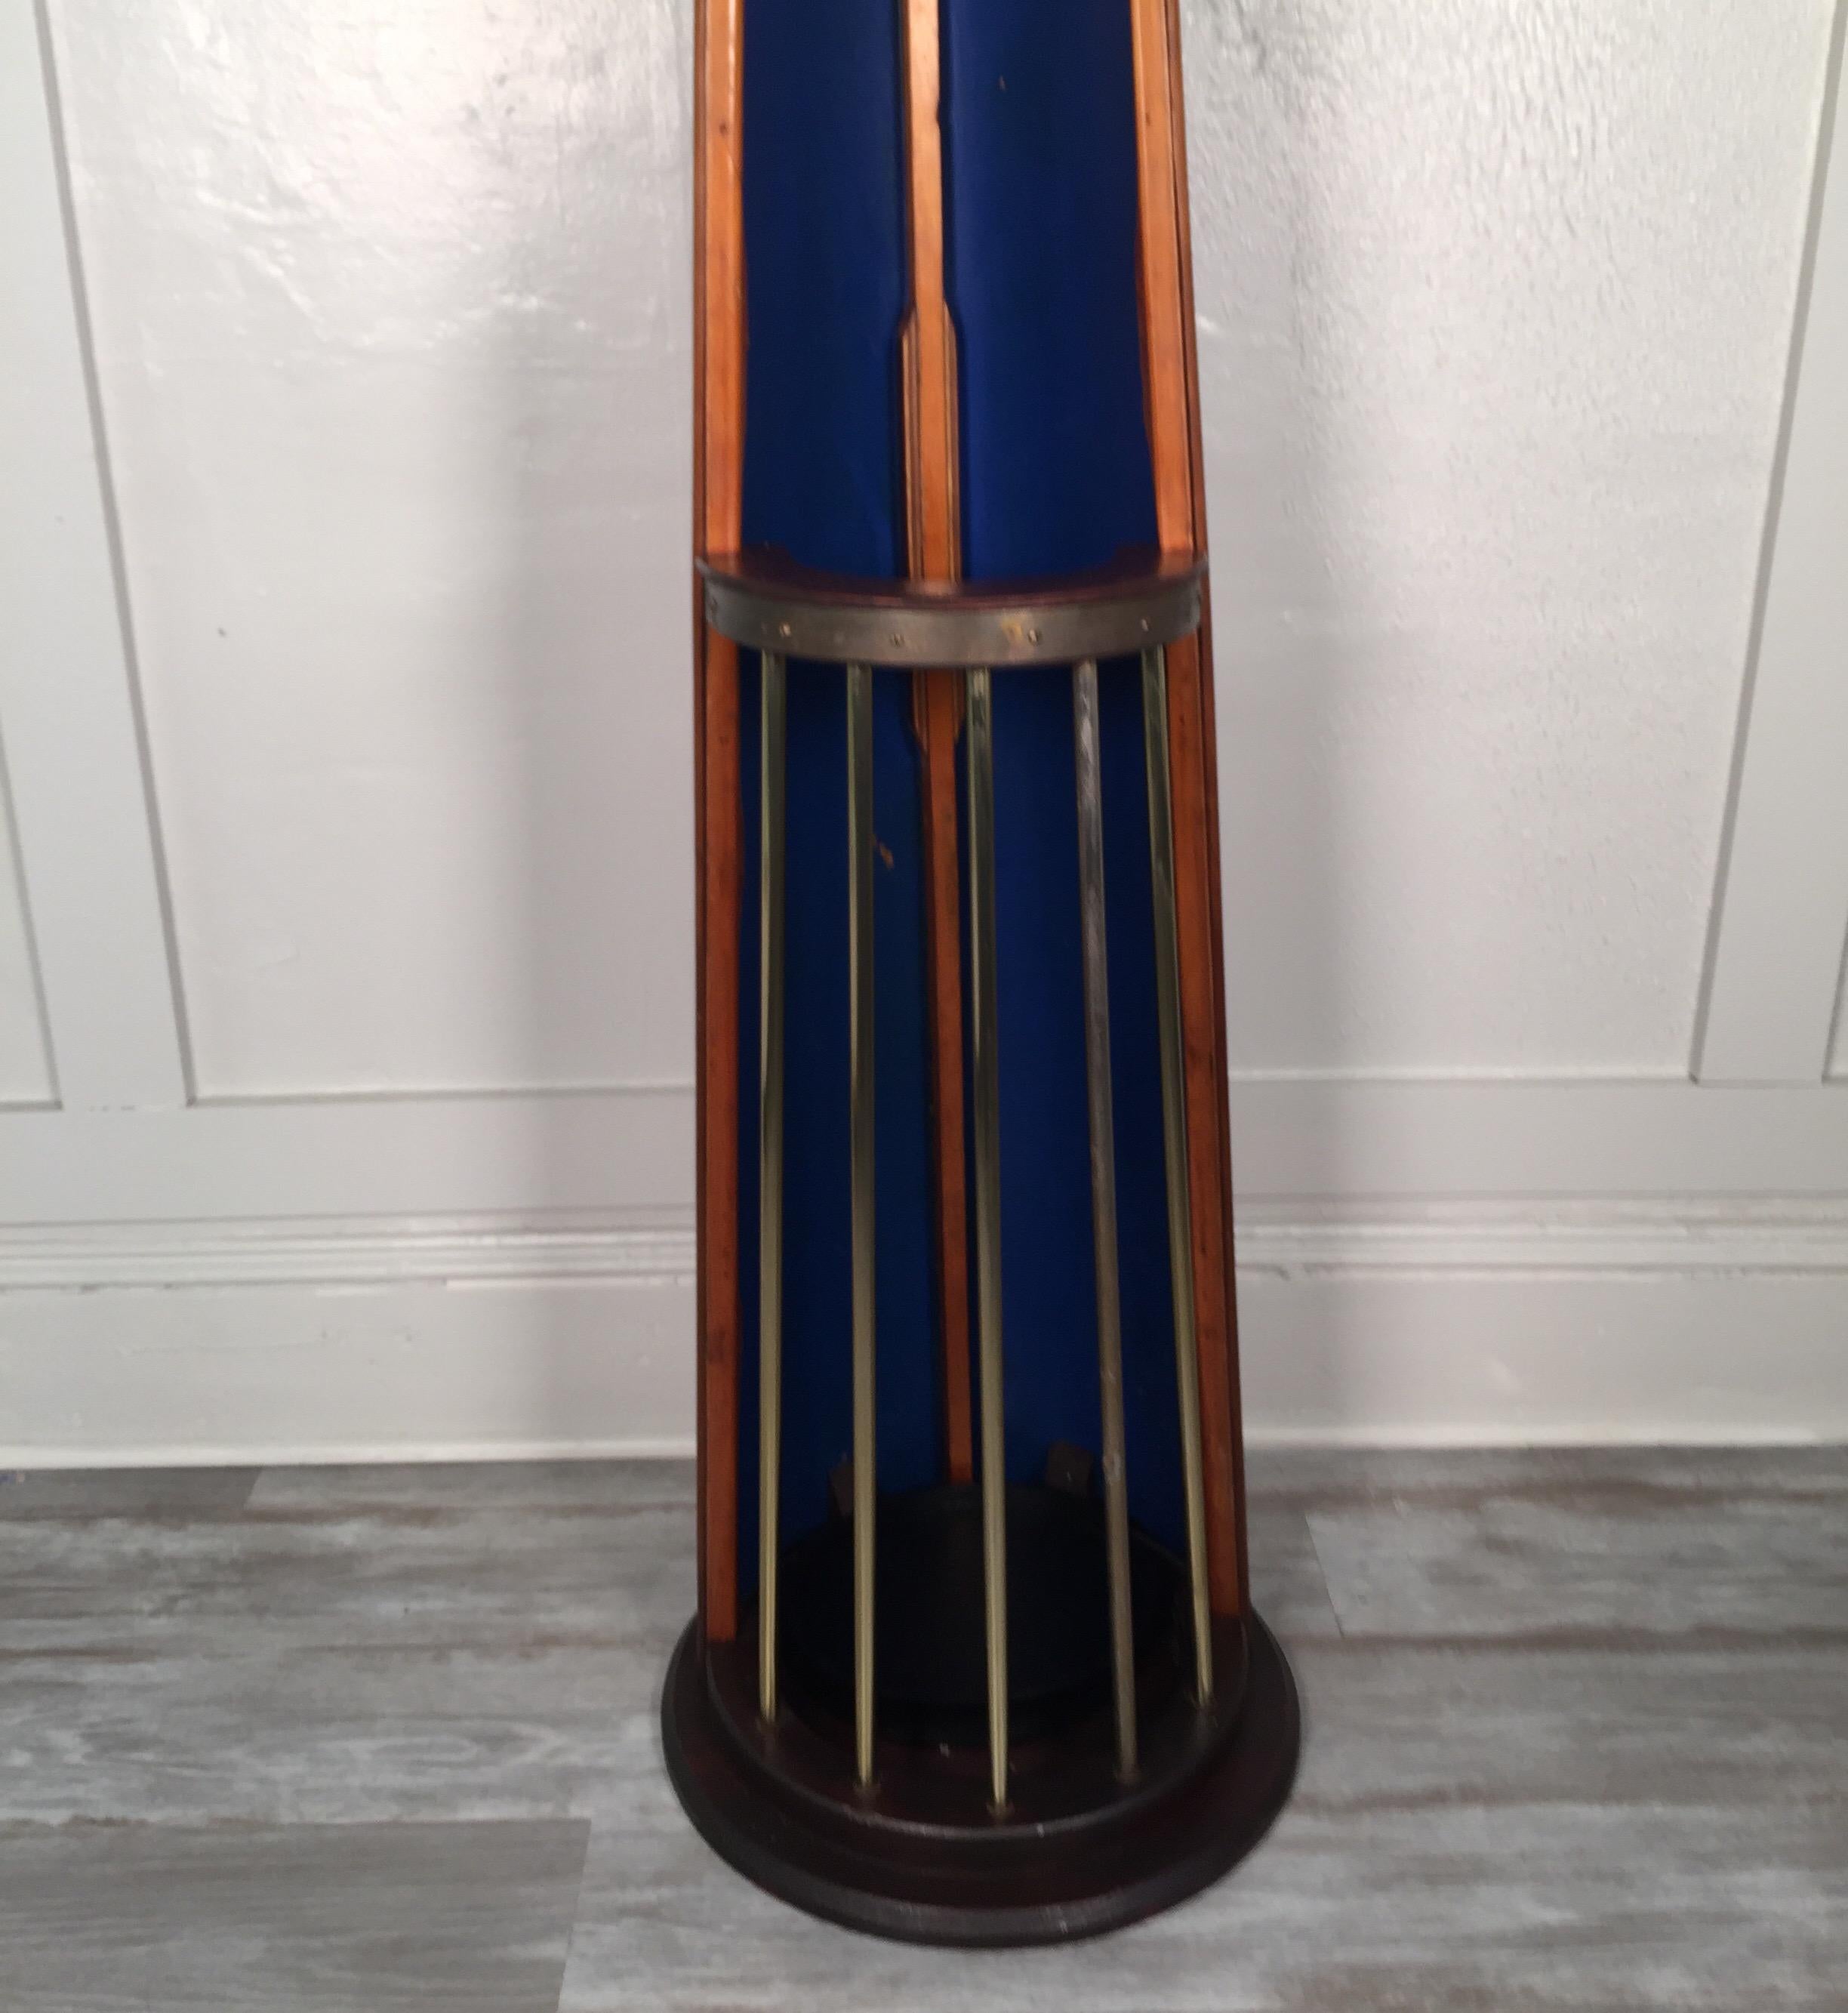 Vintage Harvard Crimson 1940's wood sculling canoe, handcrafted now into an umbrella stand, rare  Beautiful condition and a historic piece of Harvard History. 
Great statement piece for lake house or shore home and PERFECT for a Harvard